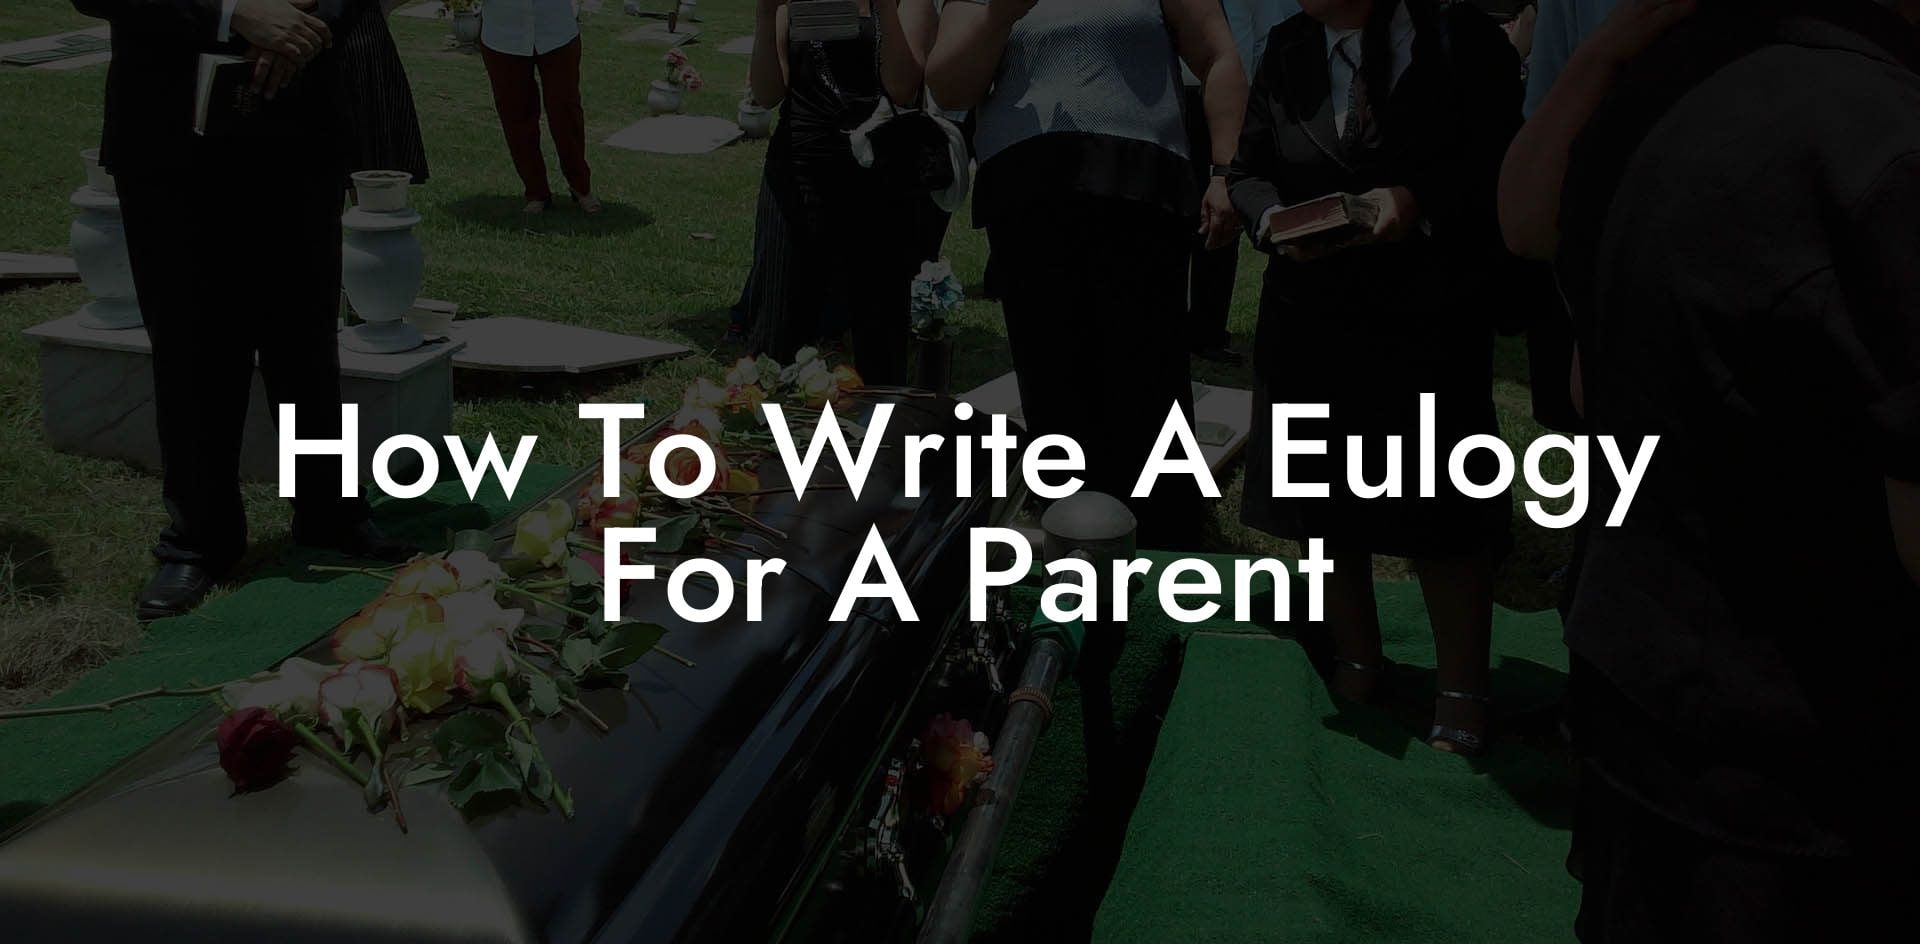 How To Write A Eulogy For A Parent